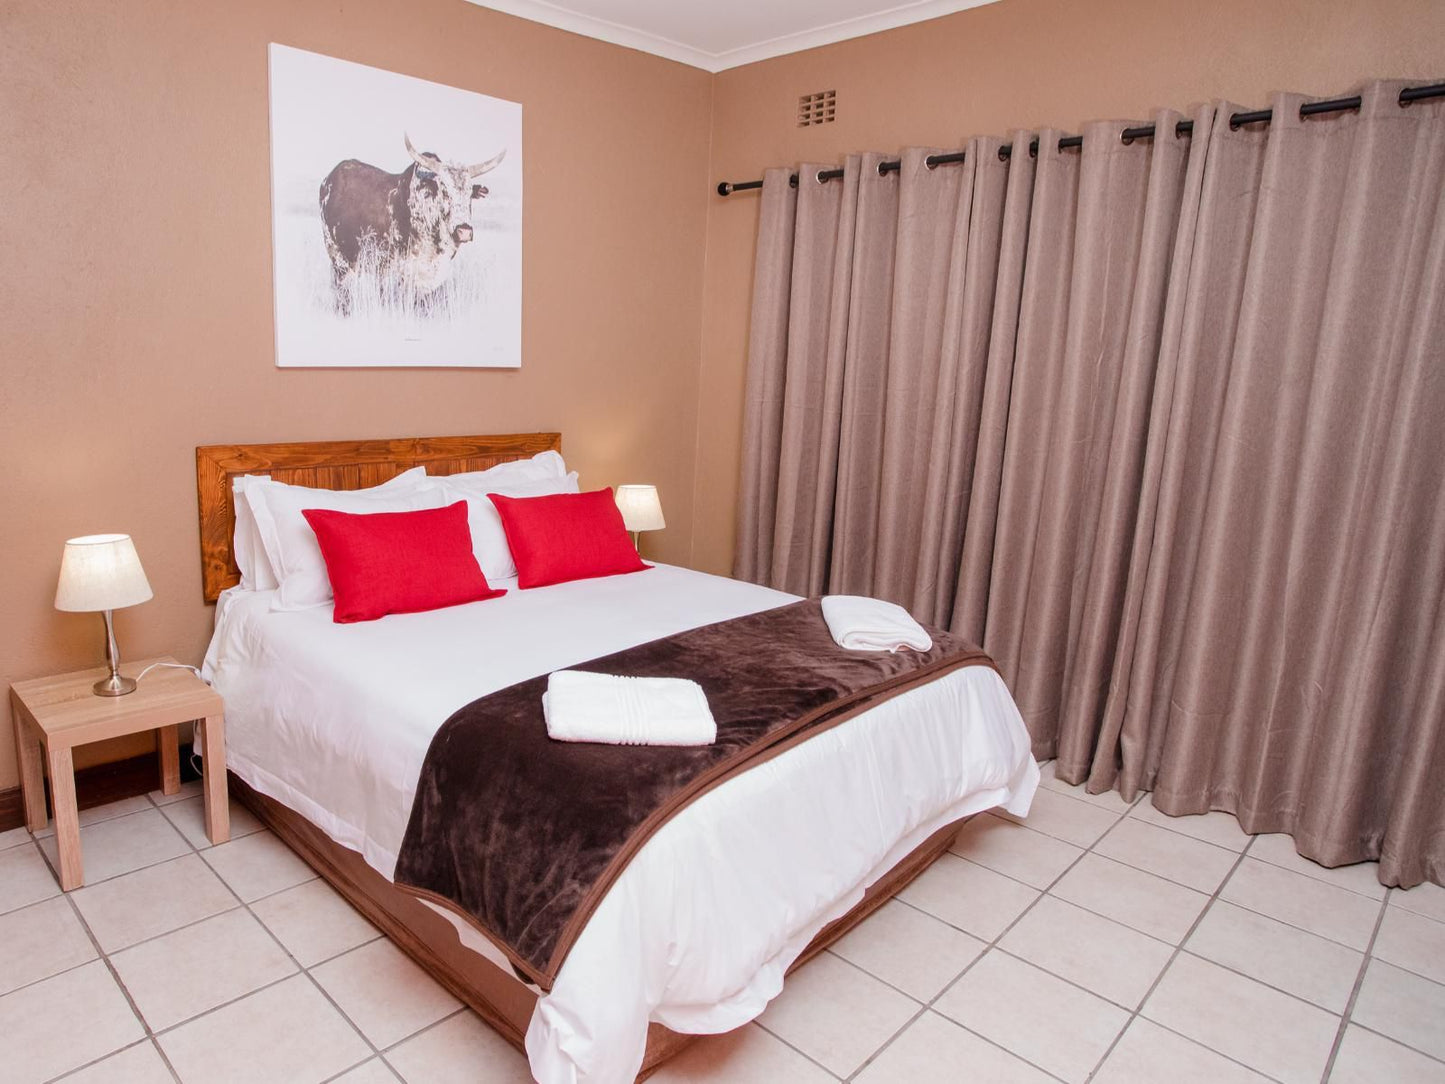 4 Gazelle Guesthouse The Rest 454 Jt Nelspruit Mpumalanga South Africa Bedroom